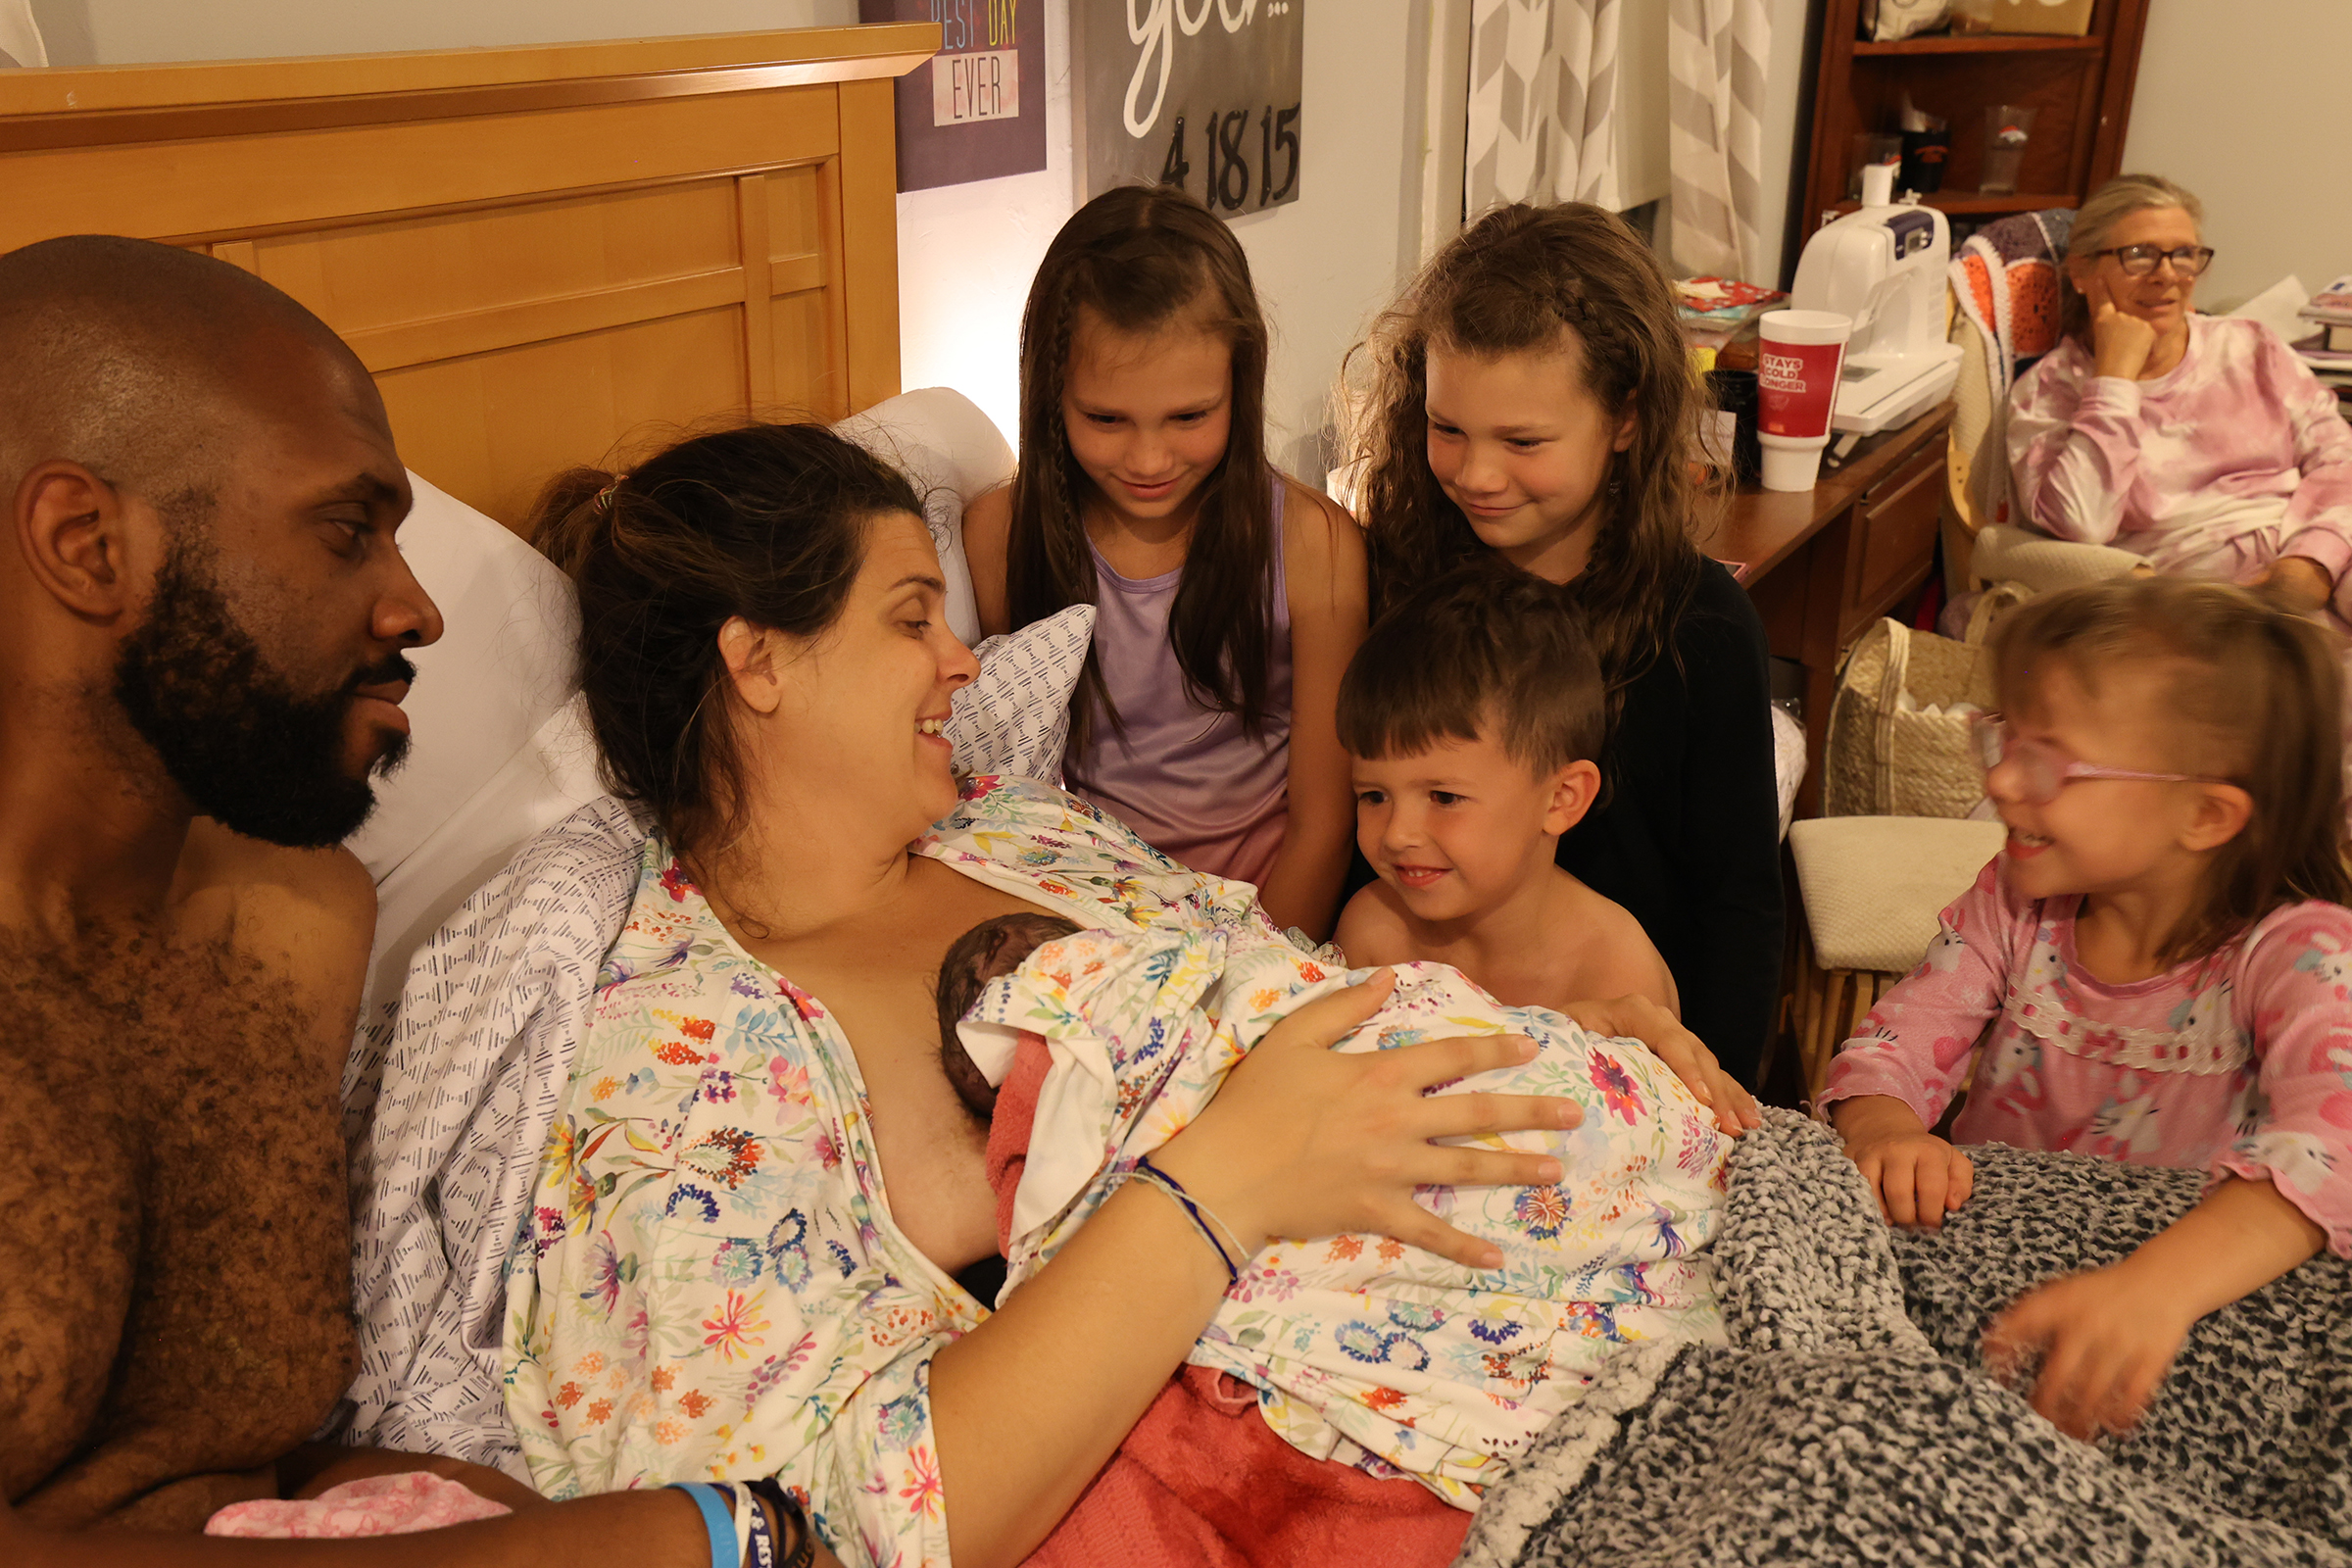 Hanaley Ivery, the youngest child in her family, was born nine months ago at home to Megan Ivery. She is not the biological child of either parent and was adopted as an embryo through the Snowflake Embryo Adoption program.

Shown L-R are Shimar, Megan with newborn Hanaley, Sophia, Lia, Braxton and Makenzie